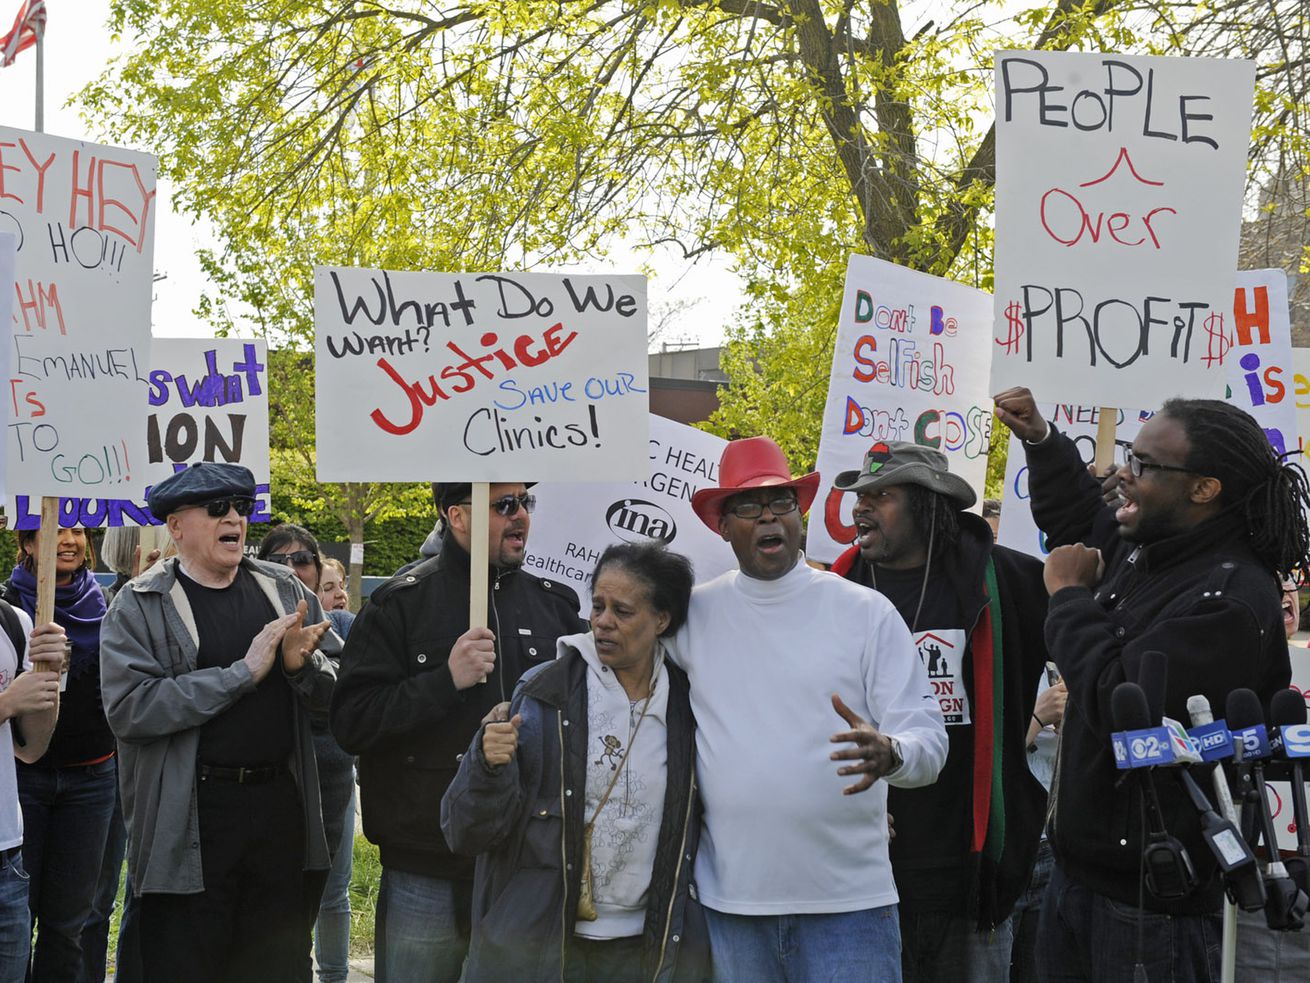 Protesters oppose the shutdown of the Woodlawn Mental Health Center, one of six clinics closed by then-Mayor Rahm Emanuel in 2012.